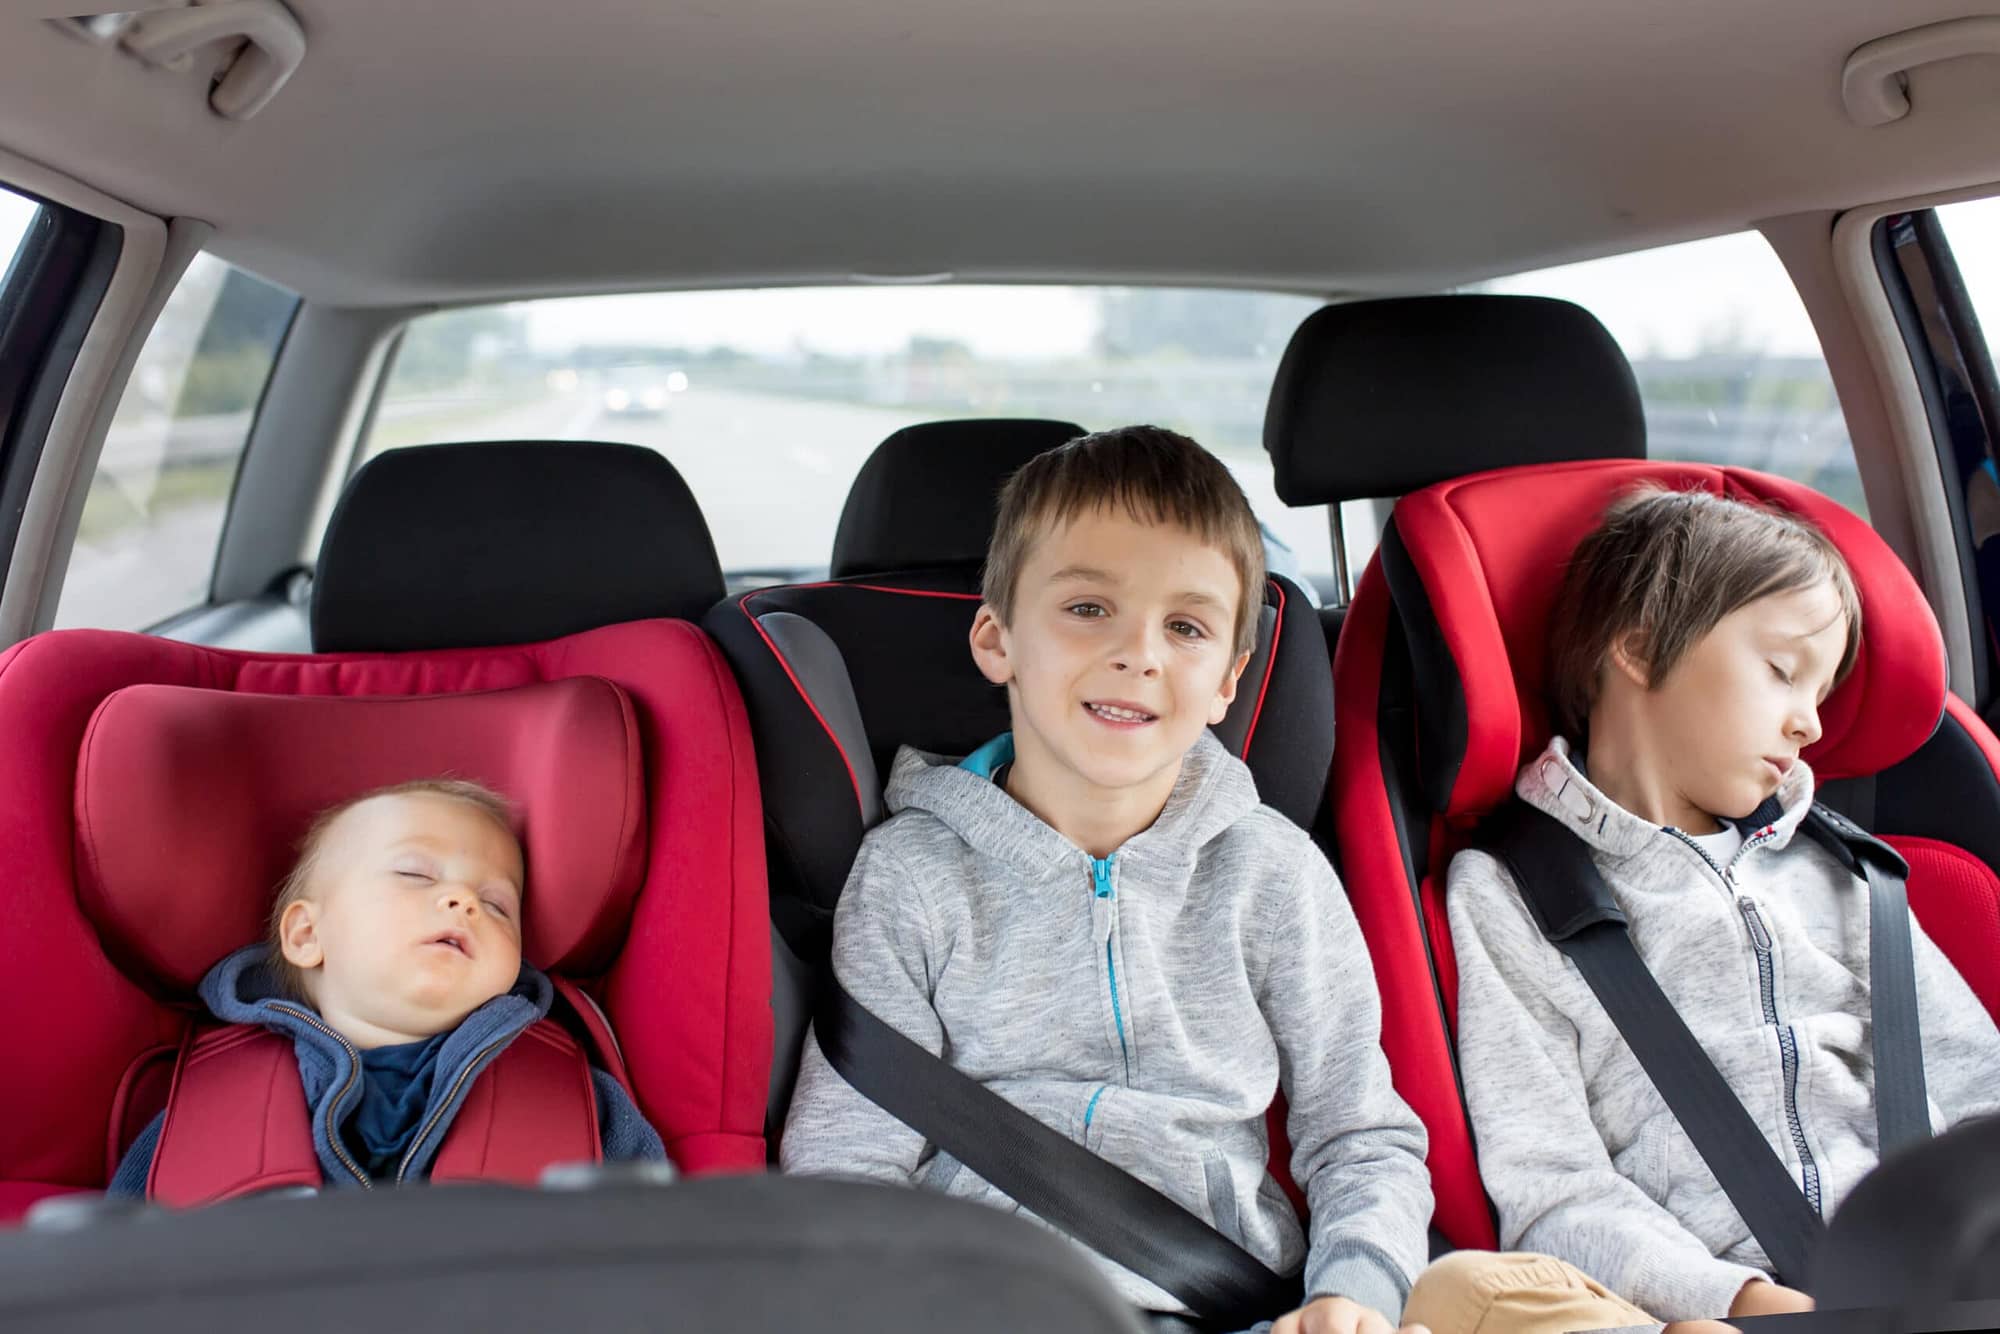 Three young kids in the car backseat